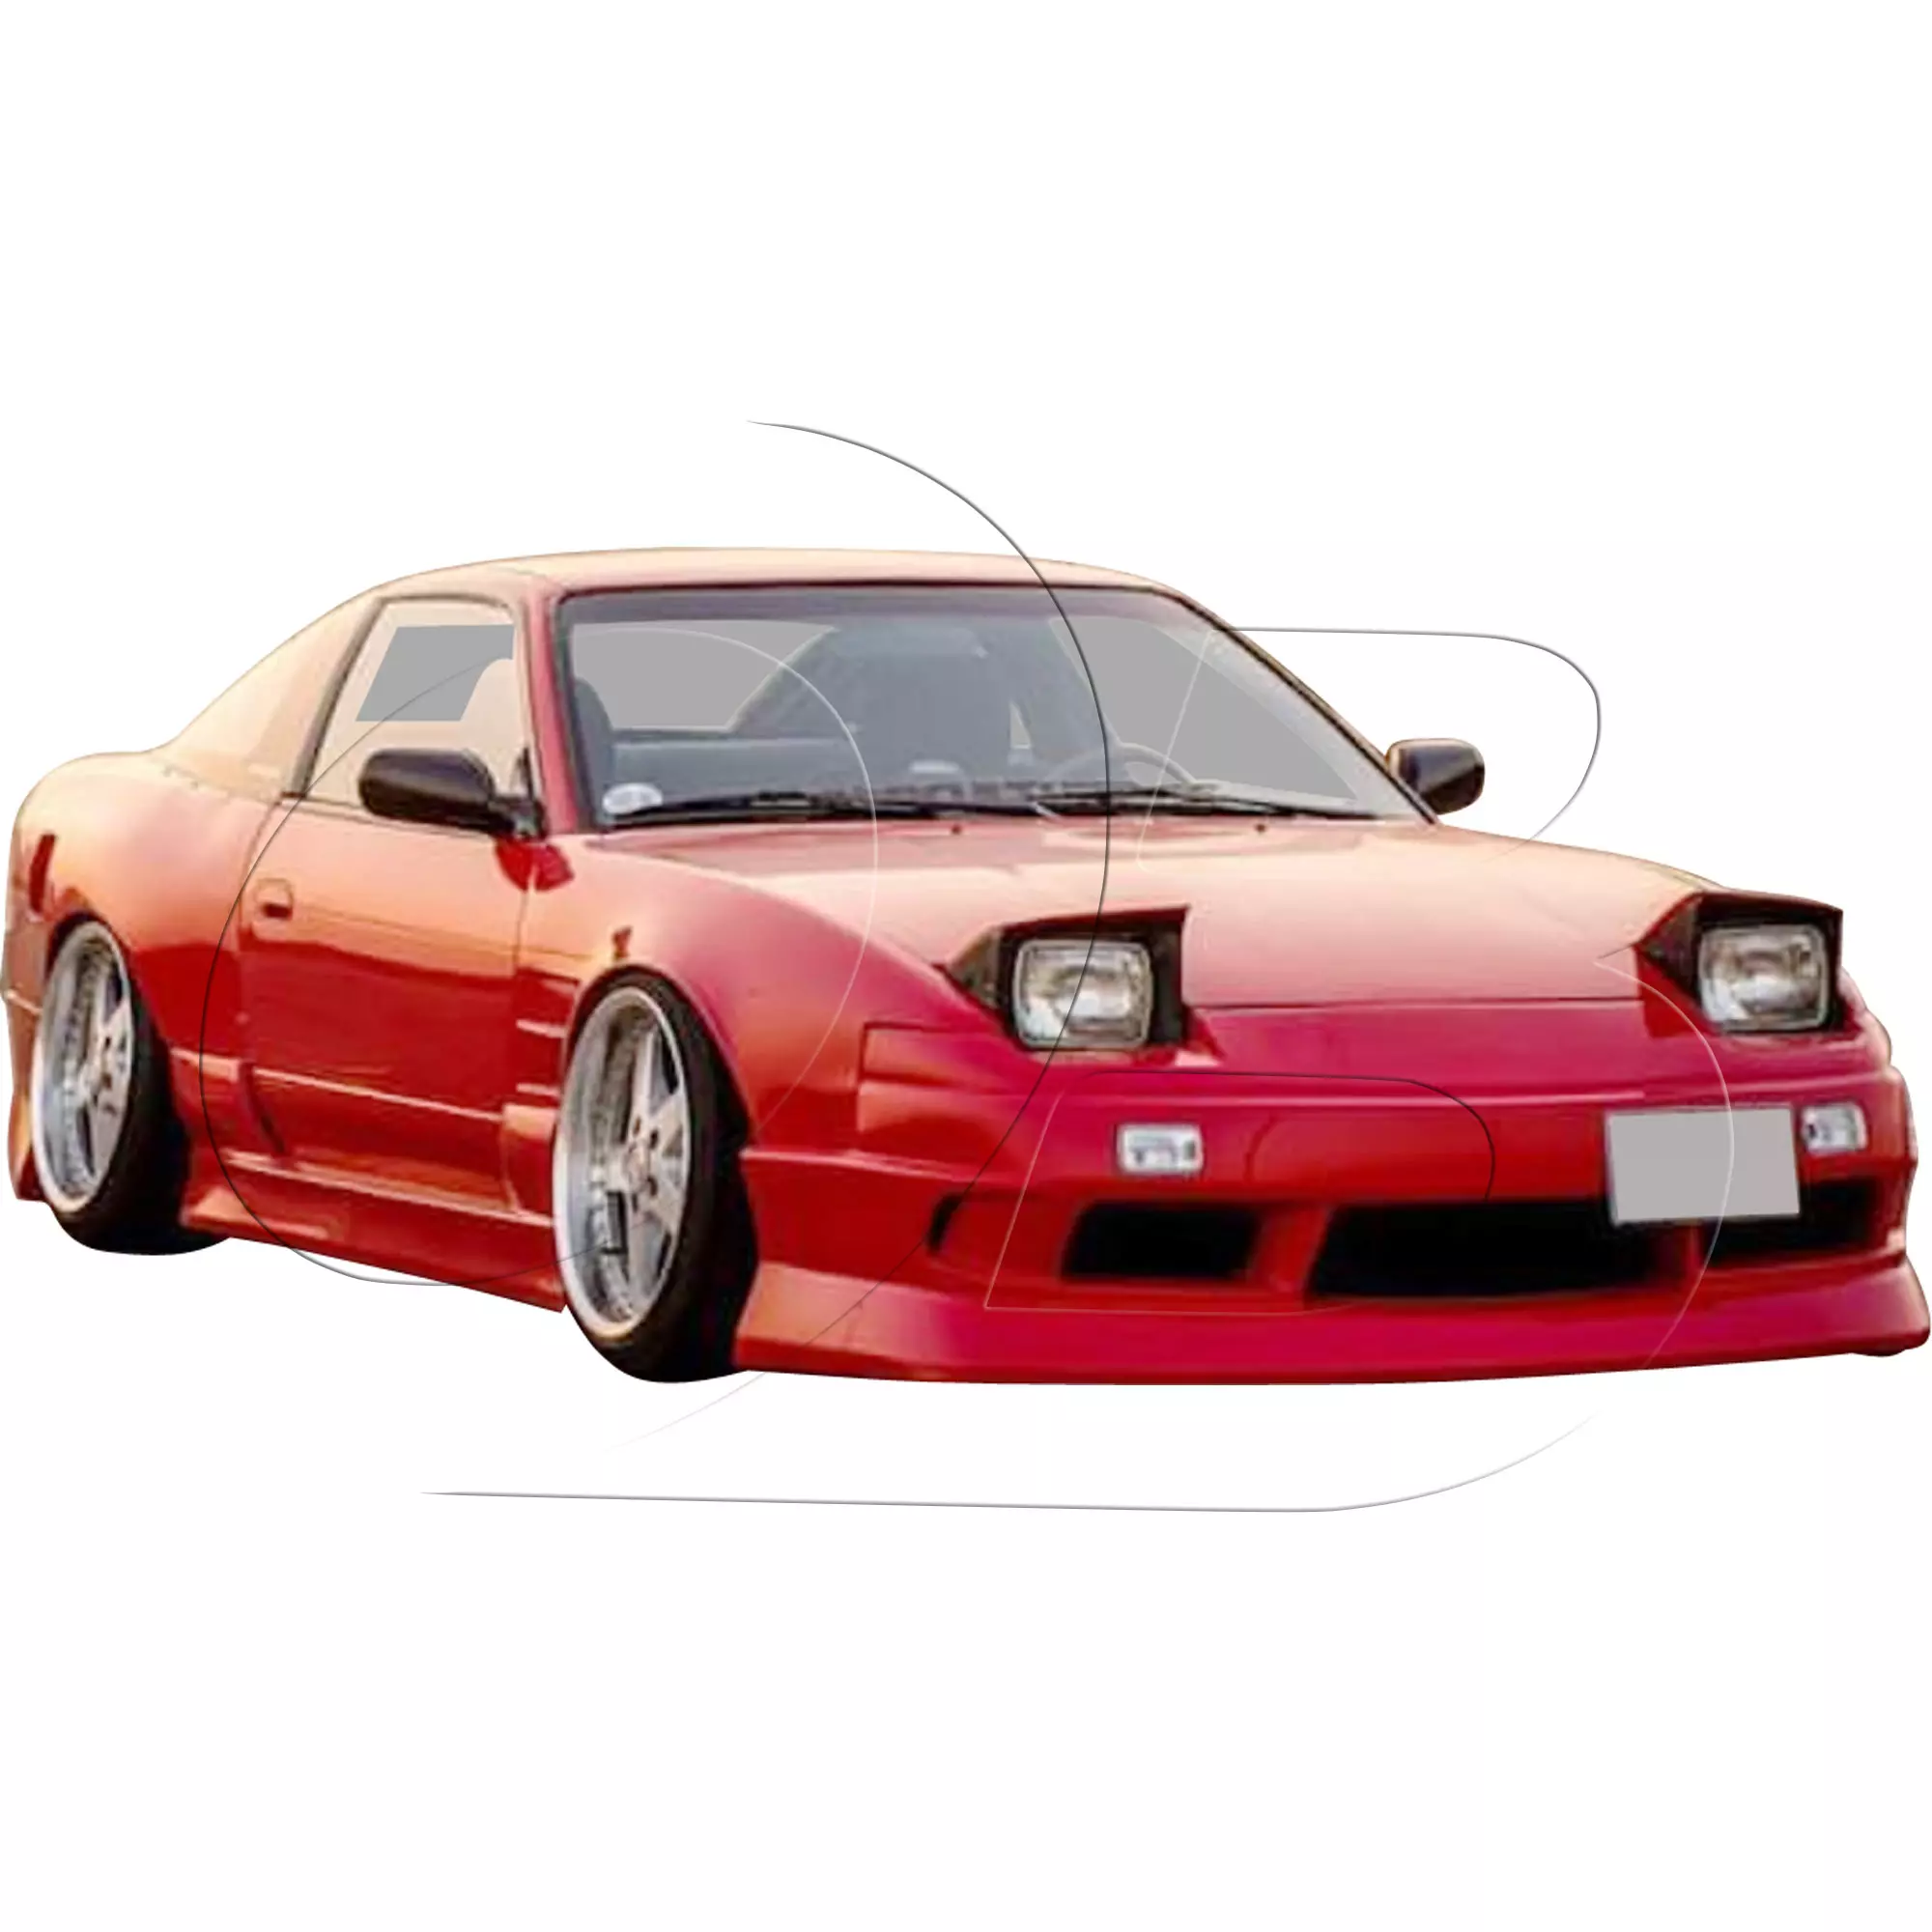 KBD Urethane Bsport2 Style 4pc Full Body Kit > Nissan 240SX 1989-1994 > 2dr Coupe - Image 16